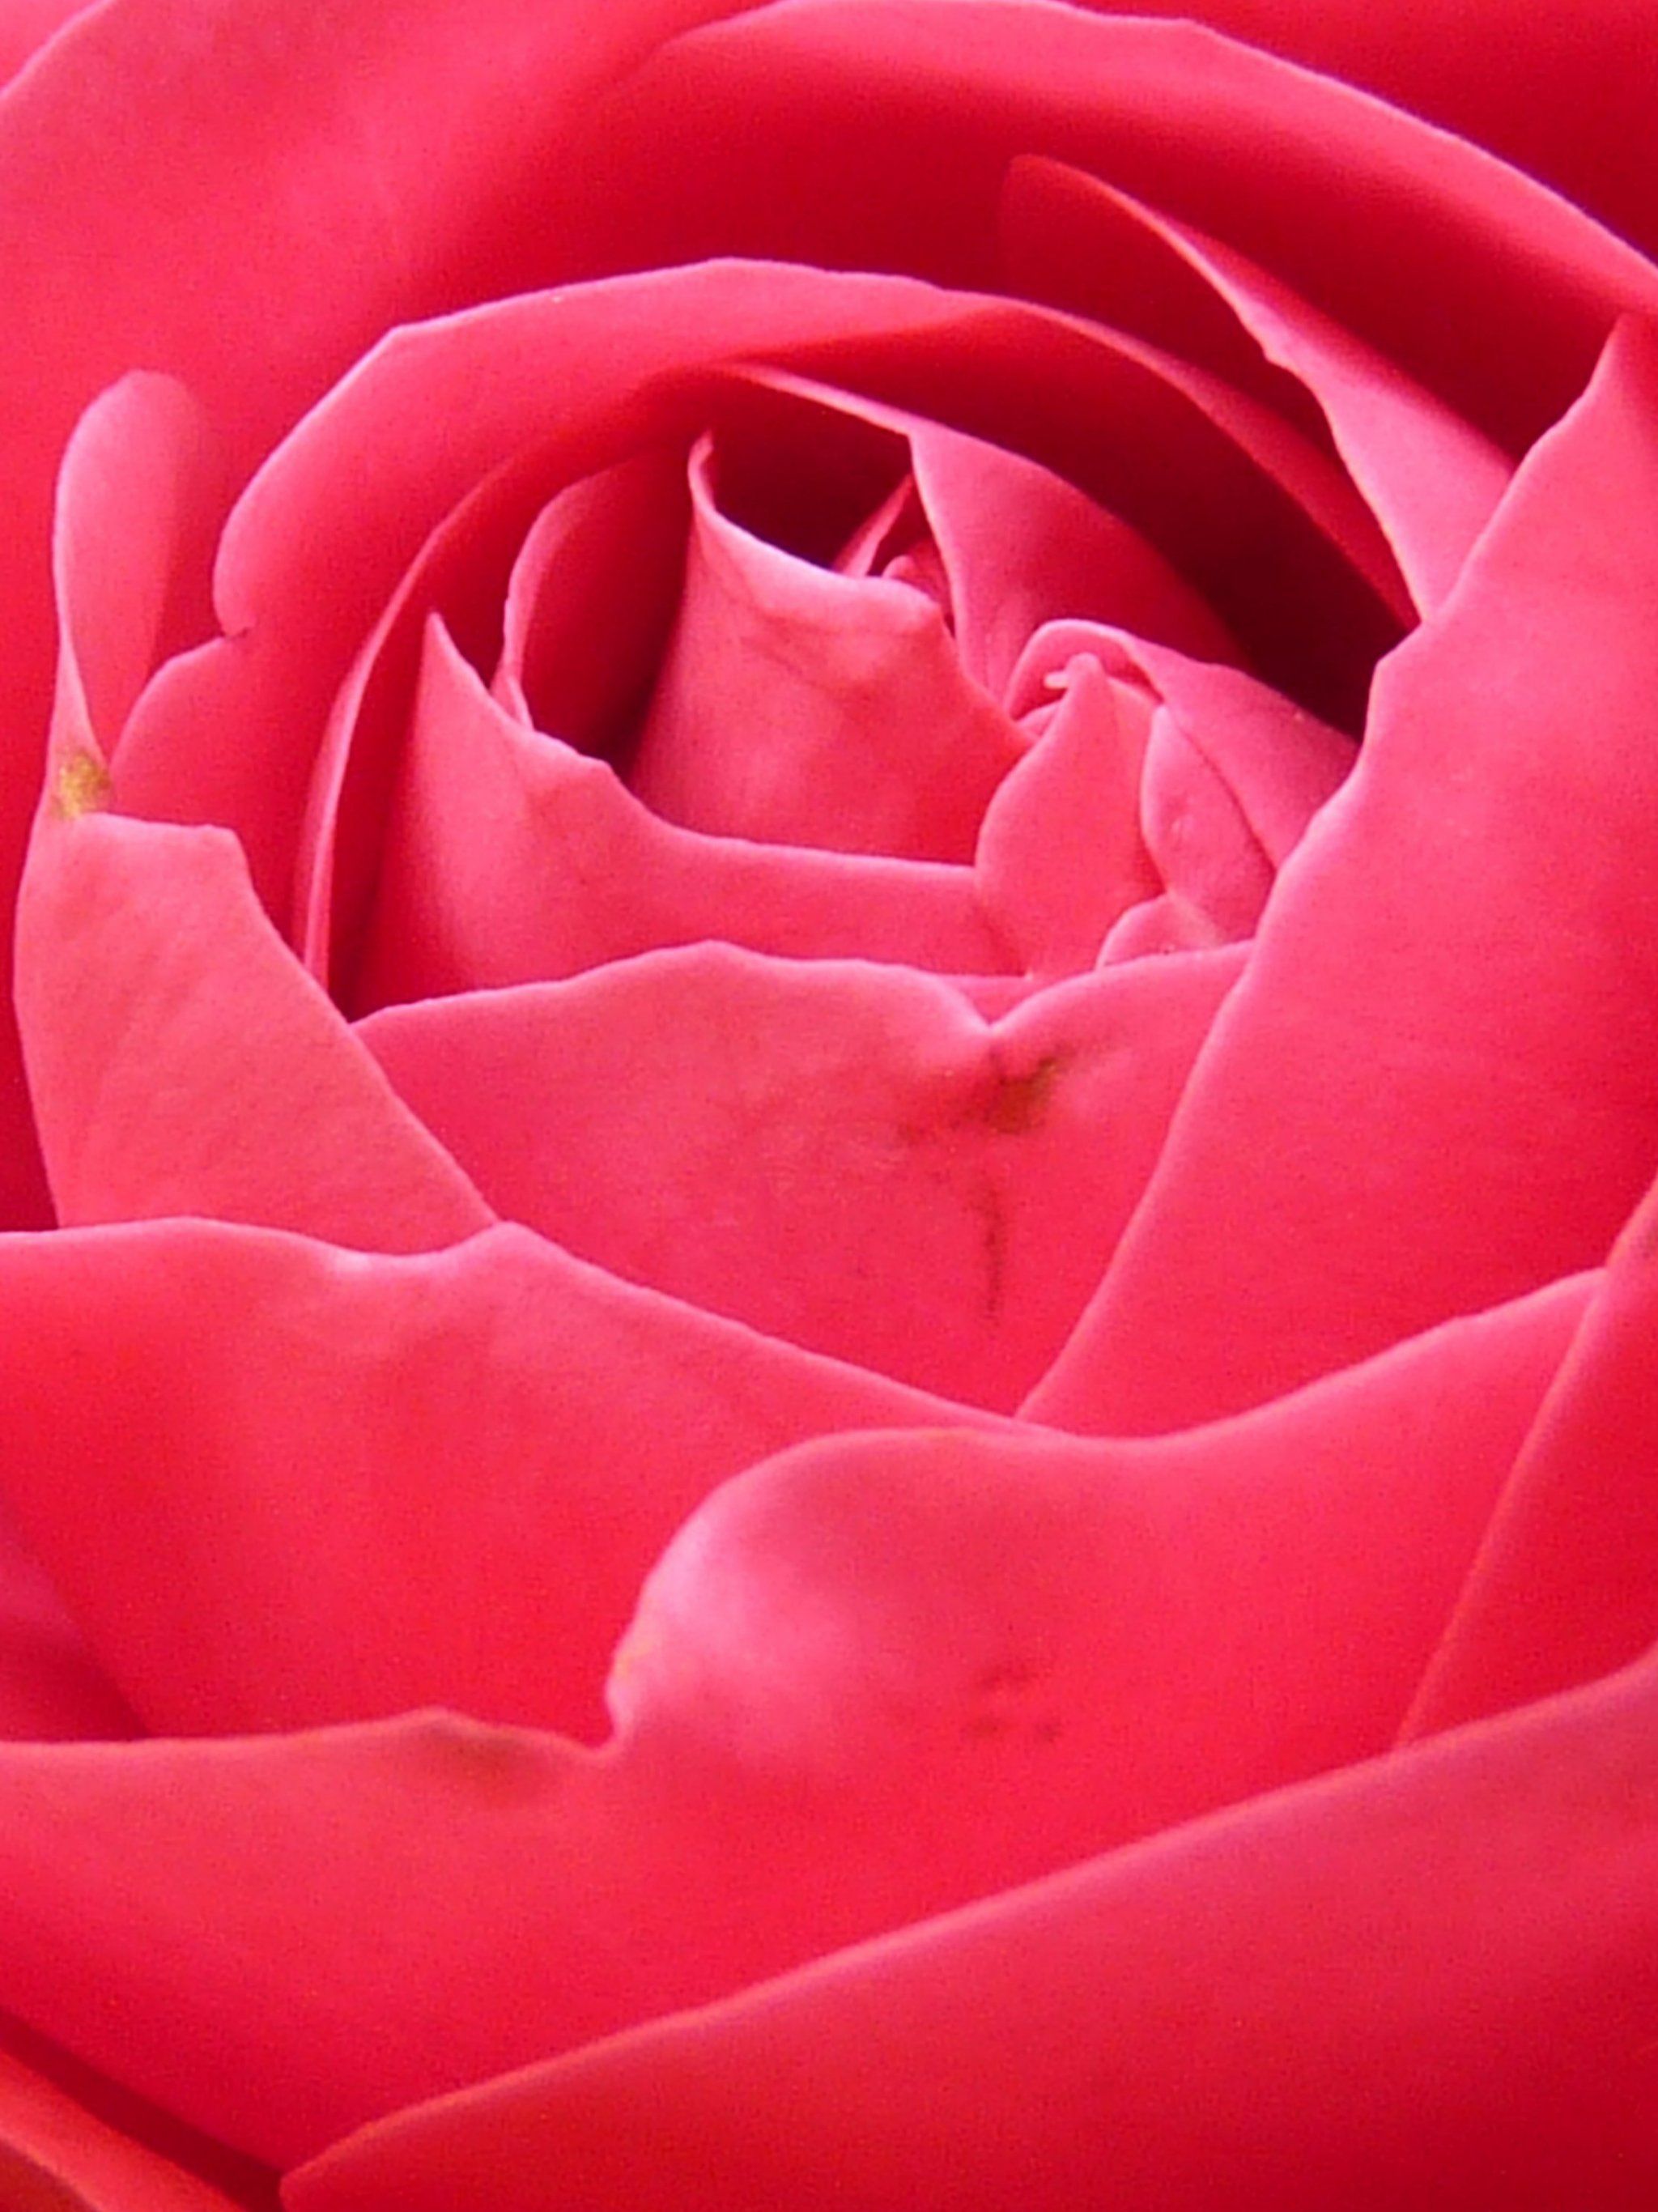 A close up of a pink rose with a small brown spot on it. - Roses, bright